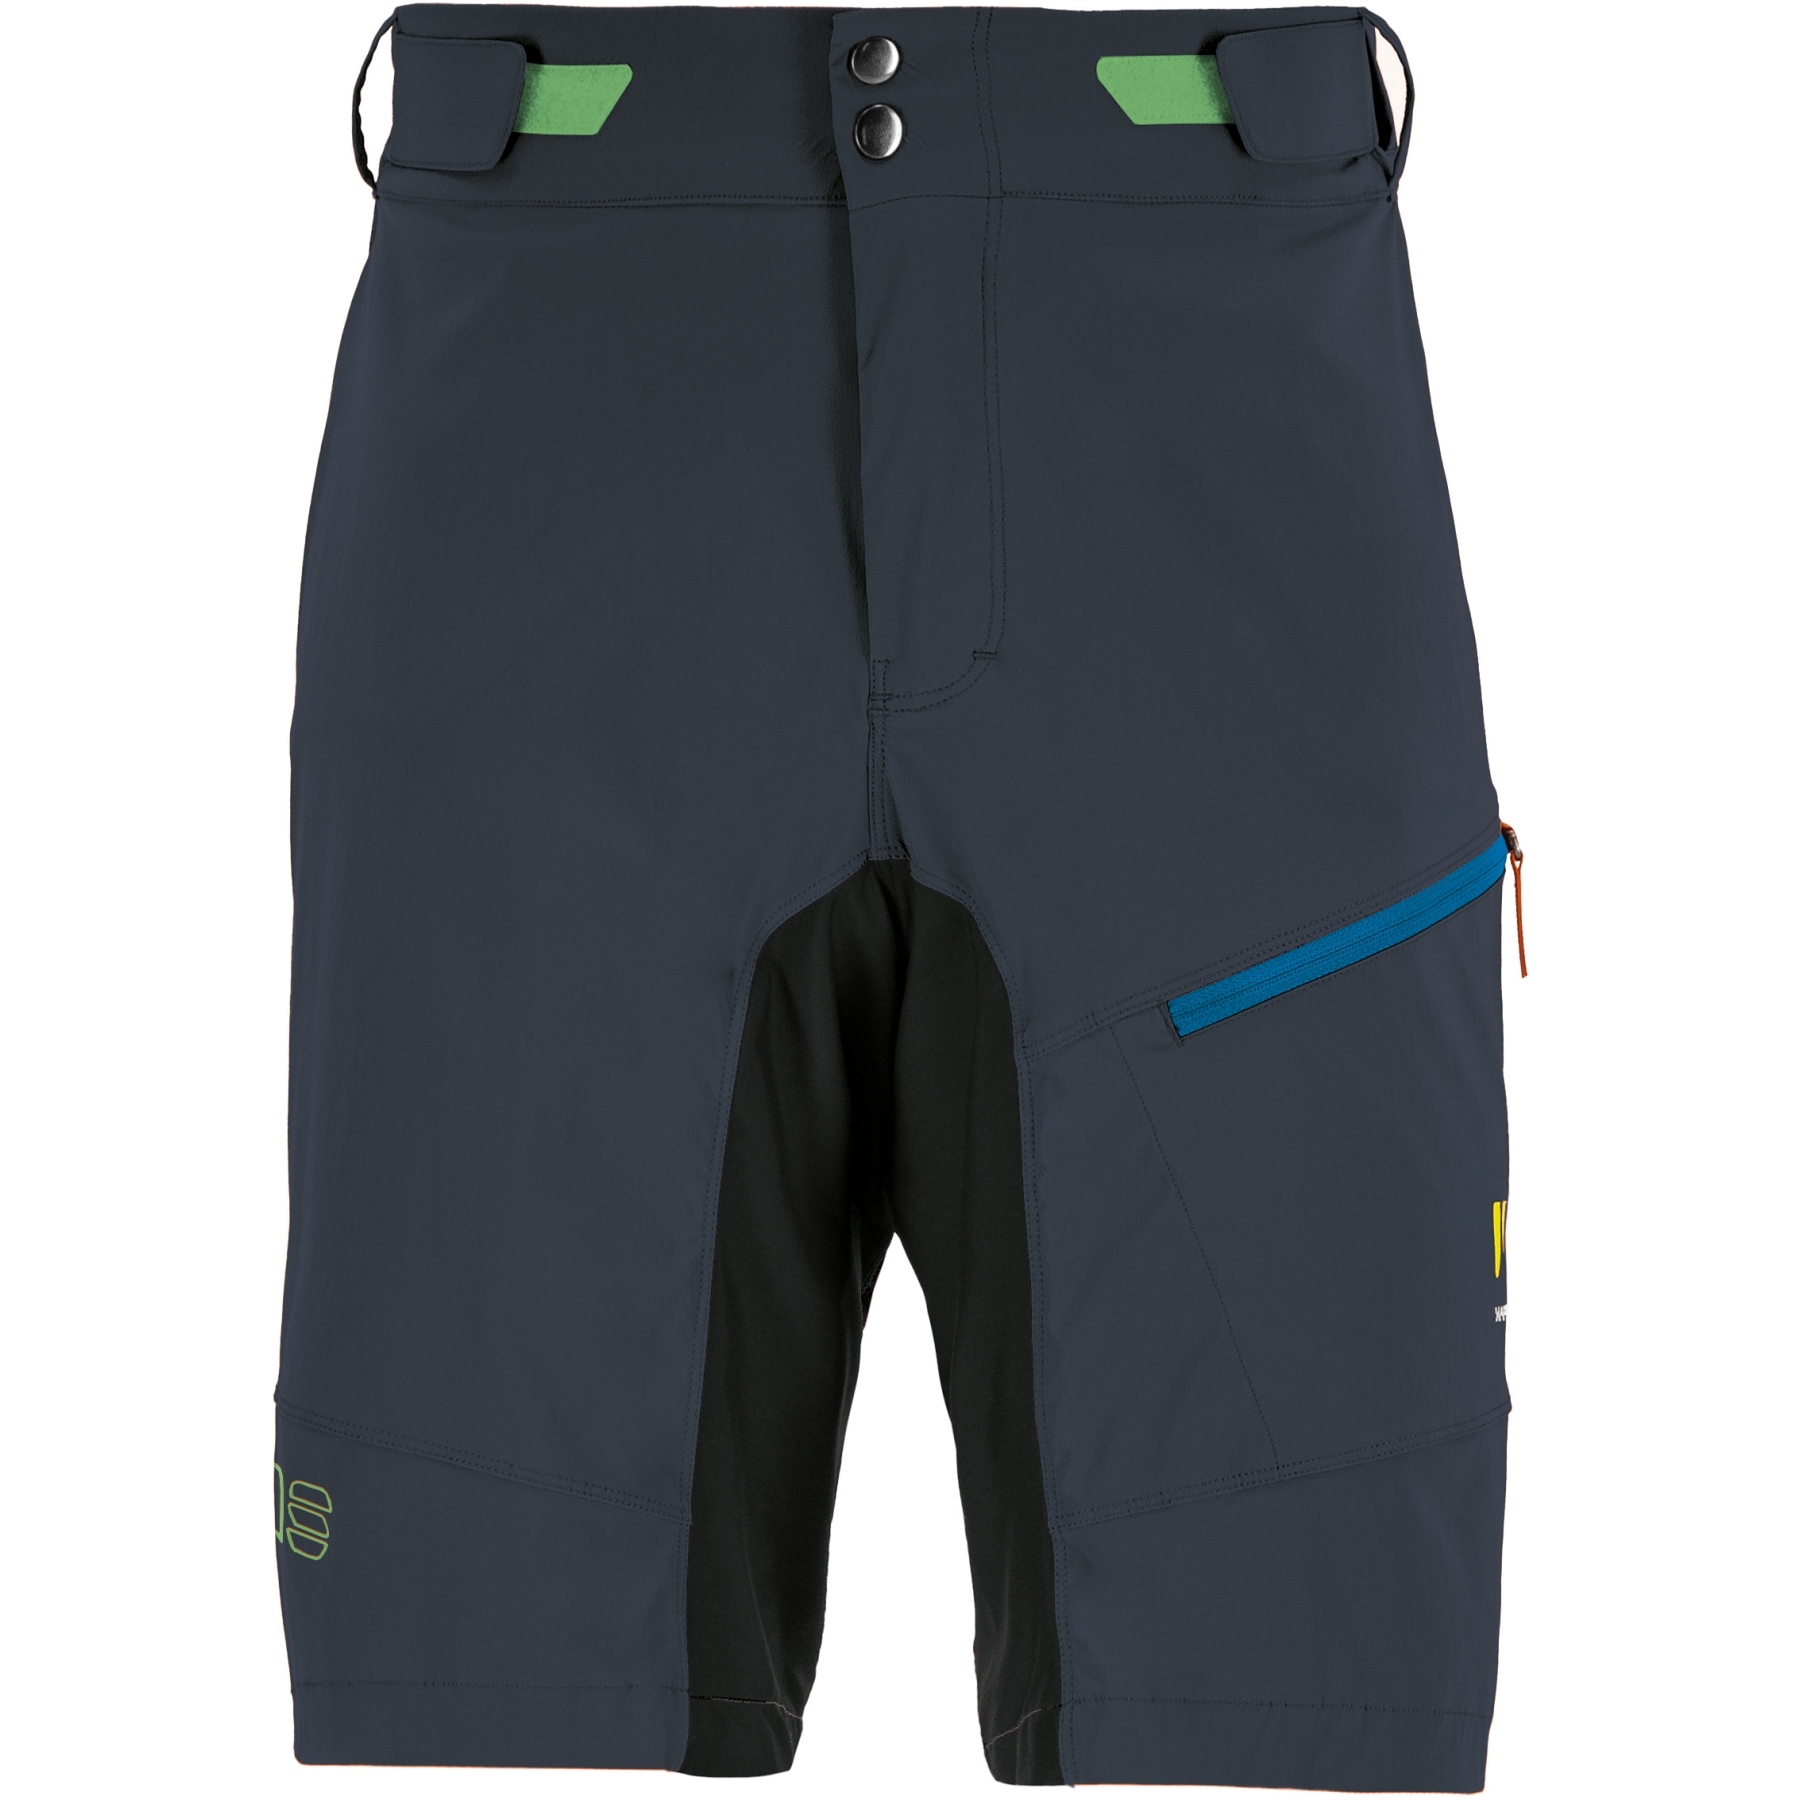 Picture of Karpos Val Viola MTB Shorts - ombre blue/black/green fluo